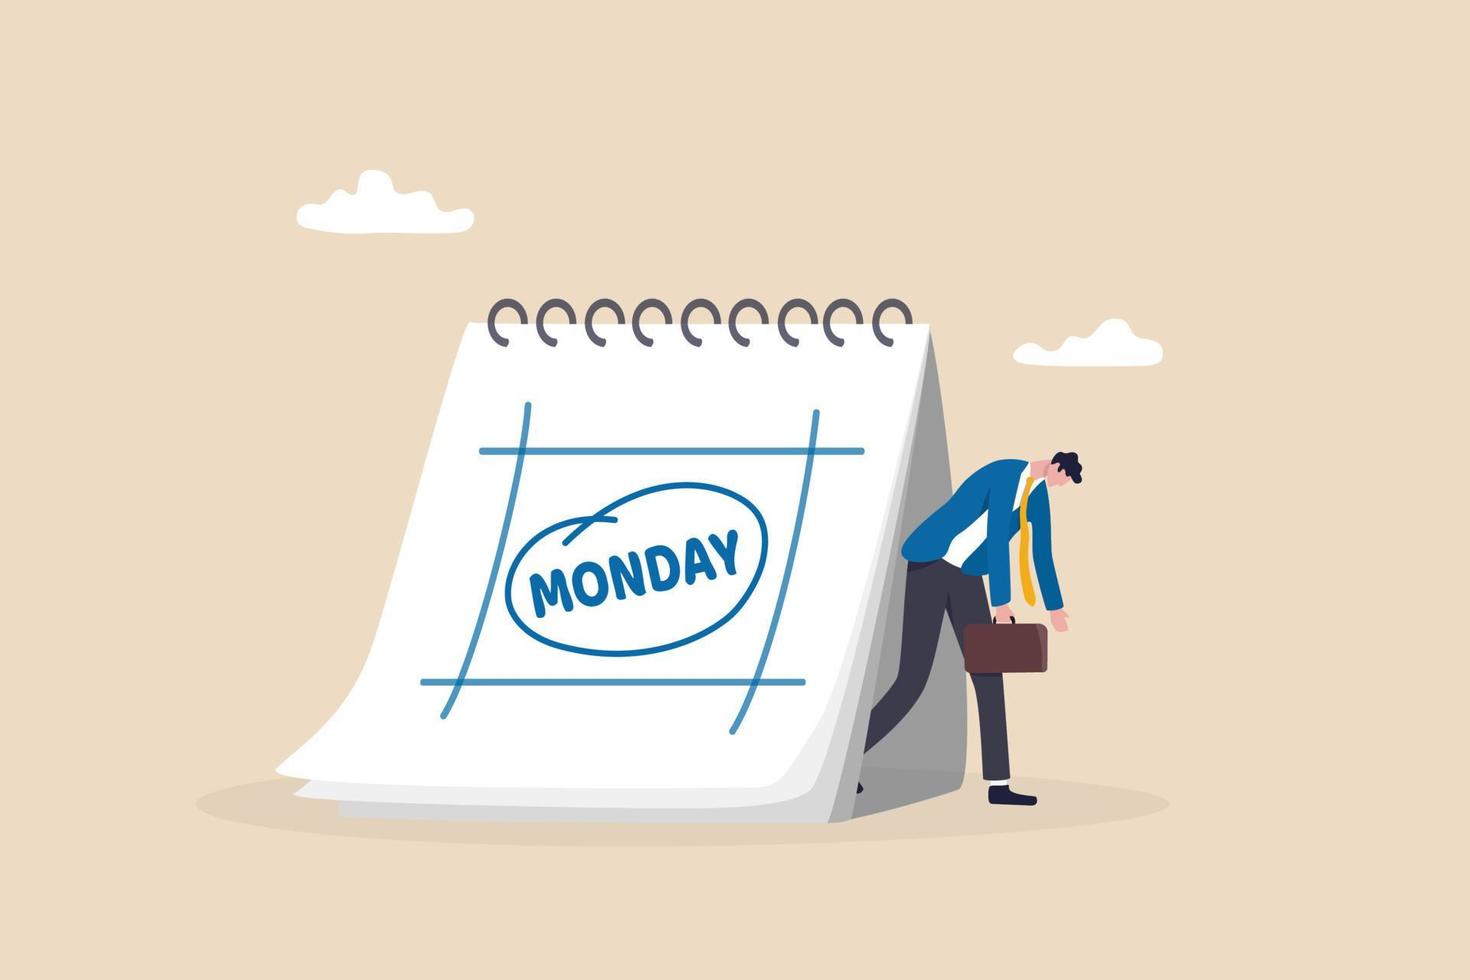 Monday blues, tired and fear of routine office work, depression or sadness worker, sleepy and frustrated on Monday morning, tired and sleepy businessman going to work with calendar showing Monday. vector